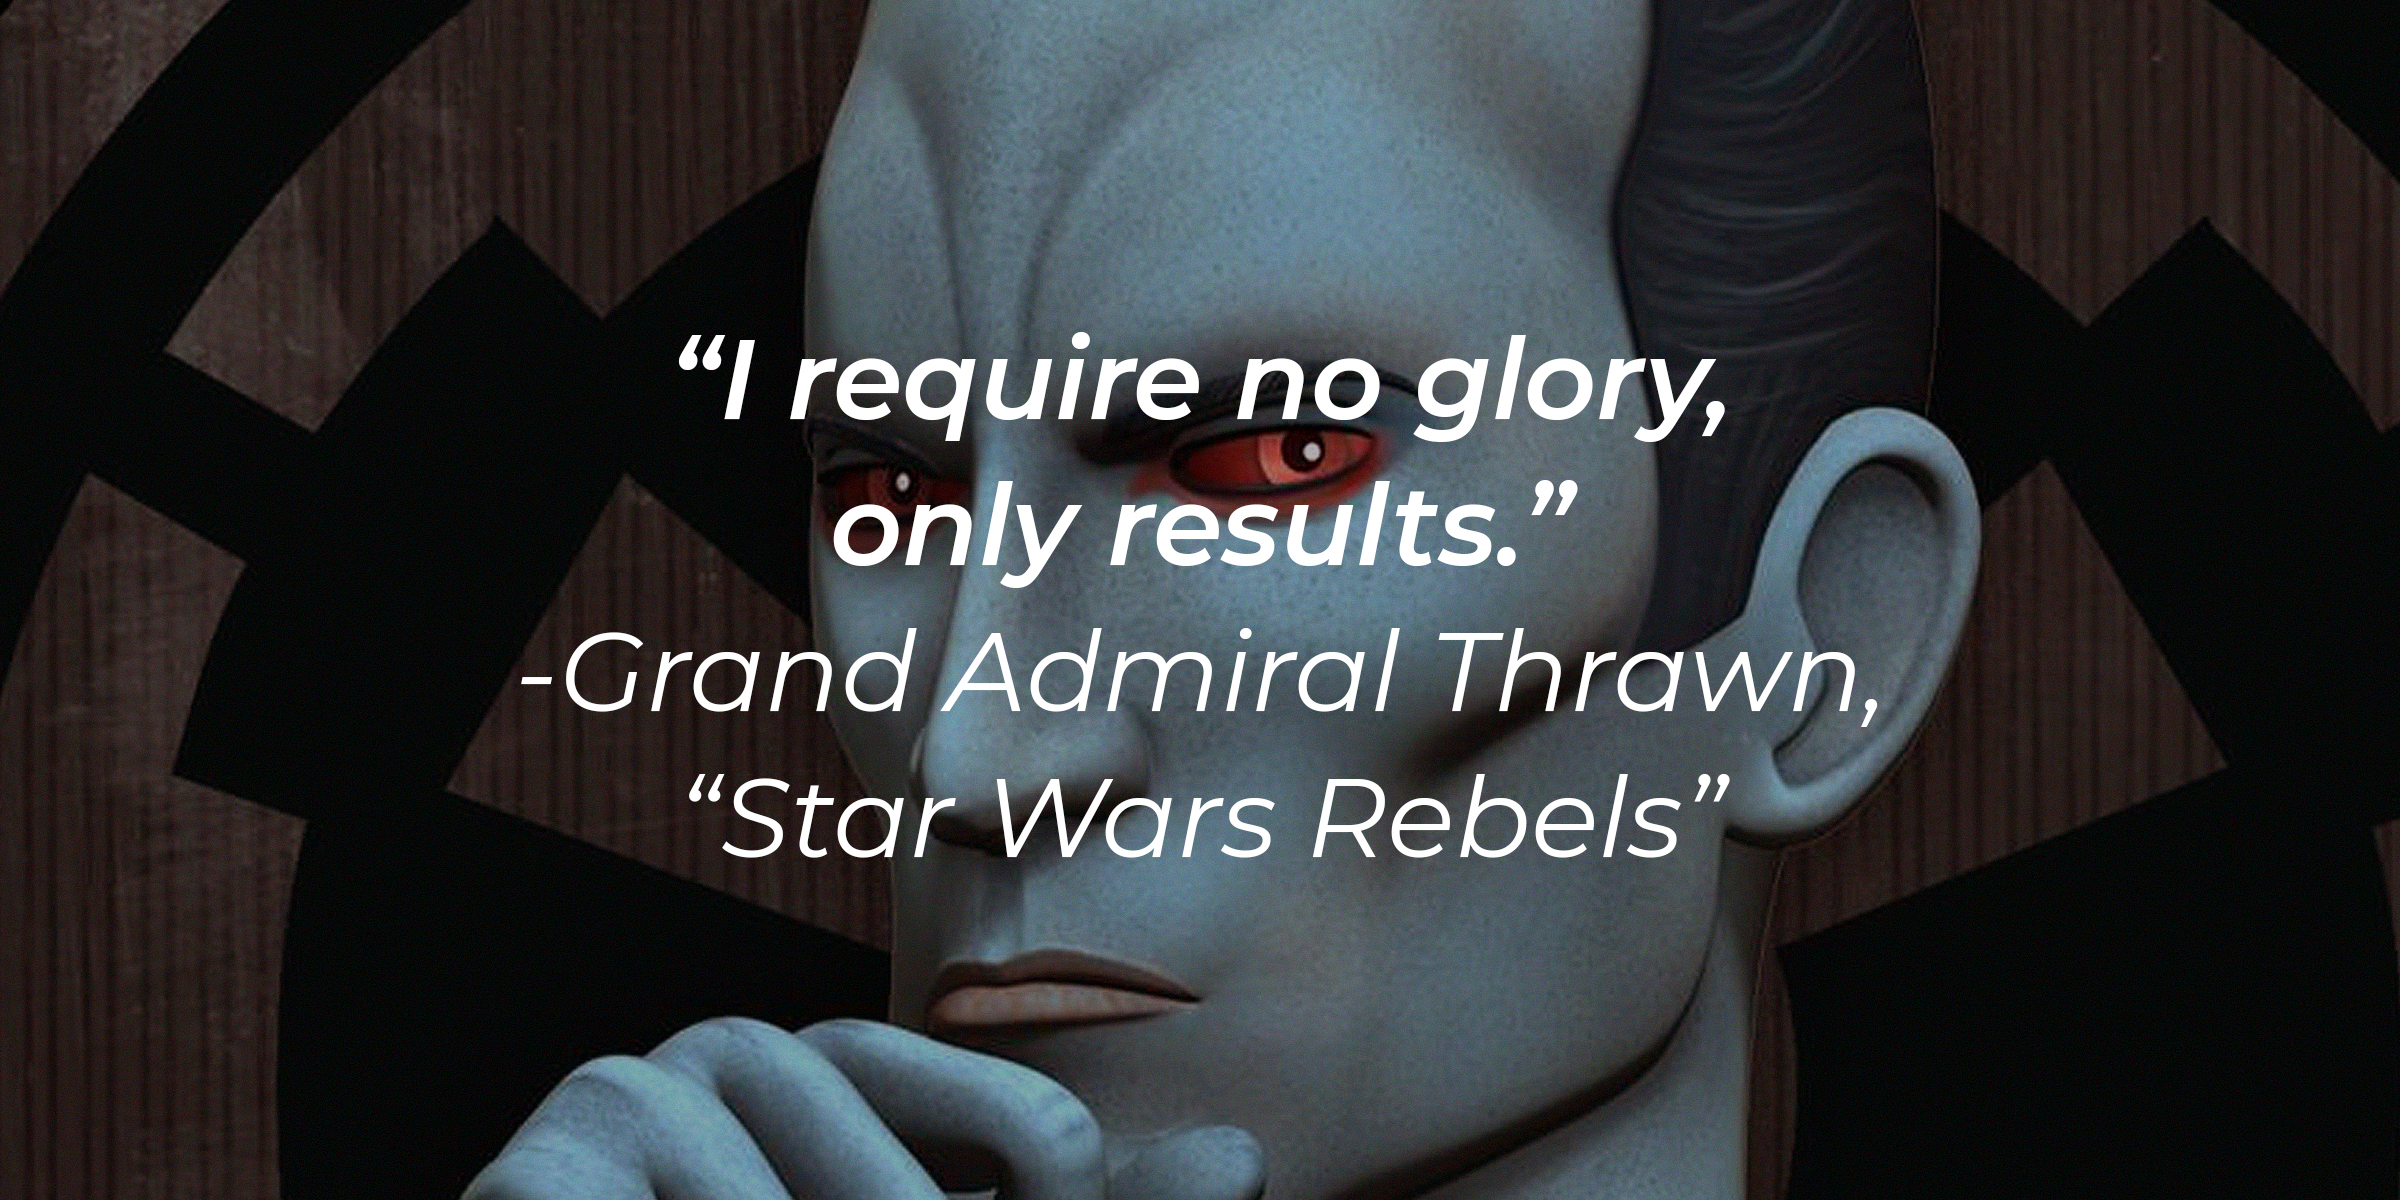 Grand Admiral Thrawn with his quote: "I require no glory, only results." | Source: Facebook.com/StarWars